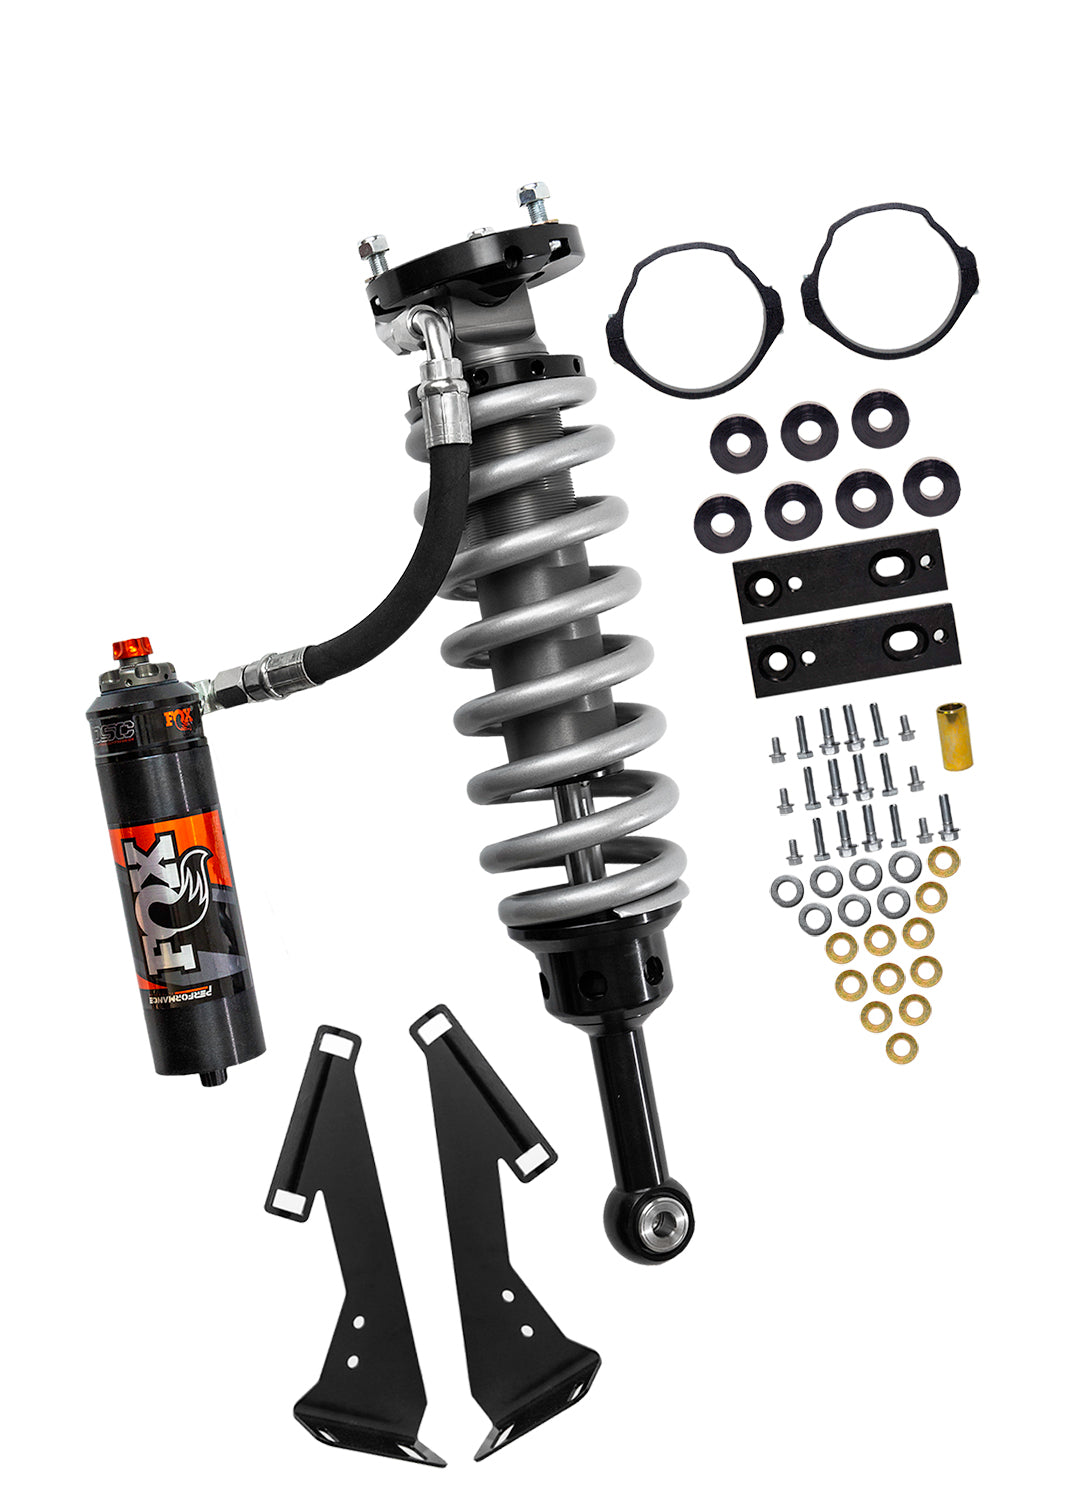 '05-23 Toyota Tacoma Fox Performance Elite Series RR 2.5 Front Coilovers (2-3" Lift) parts